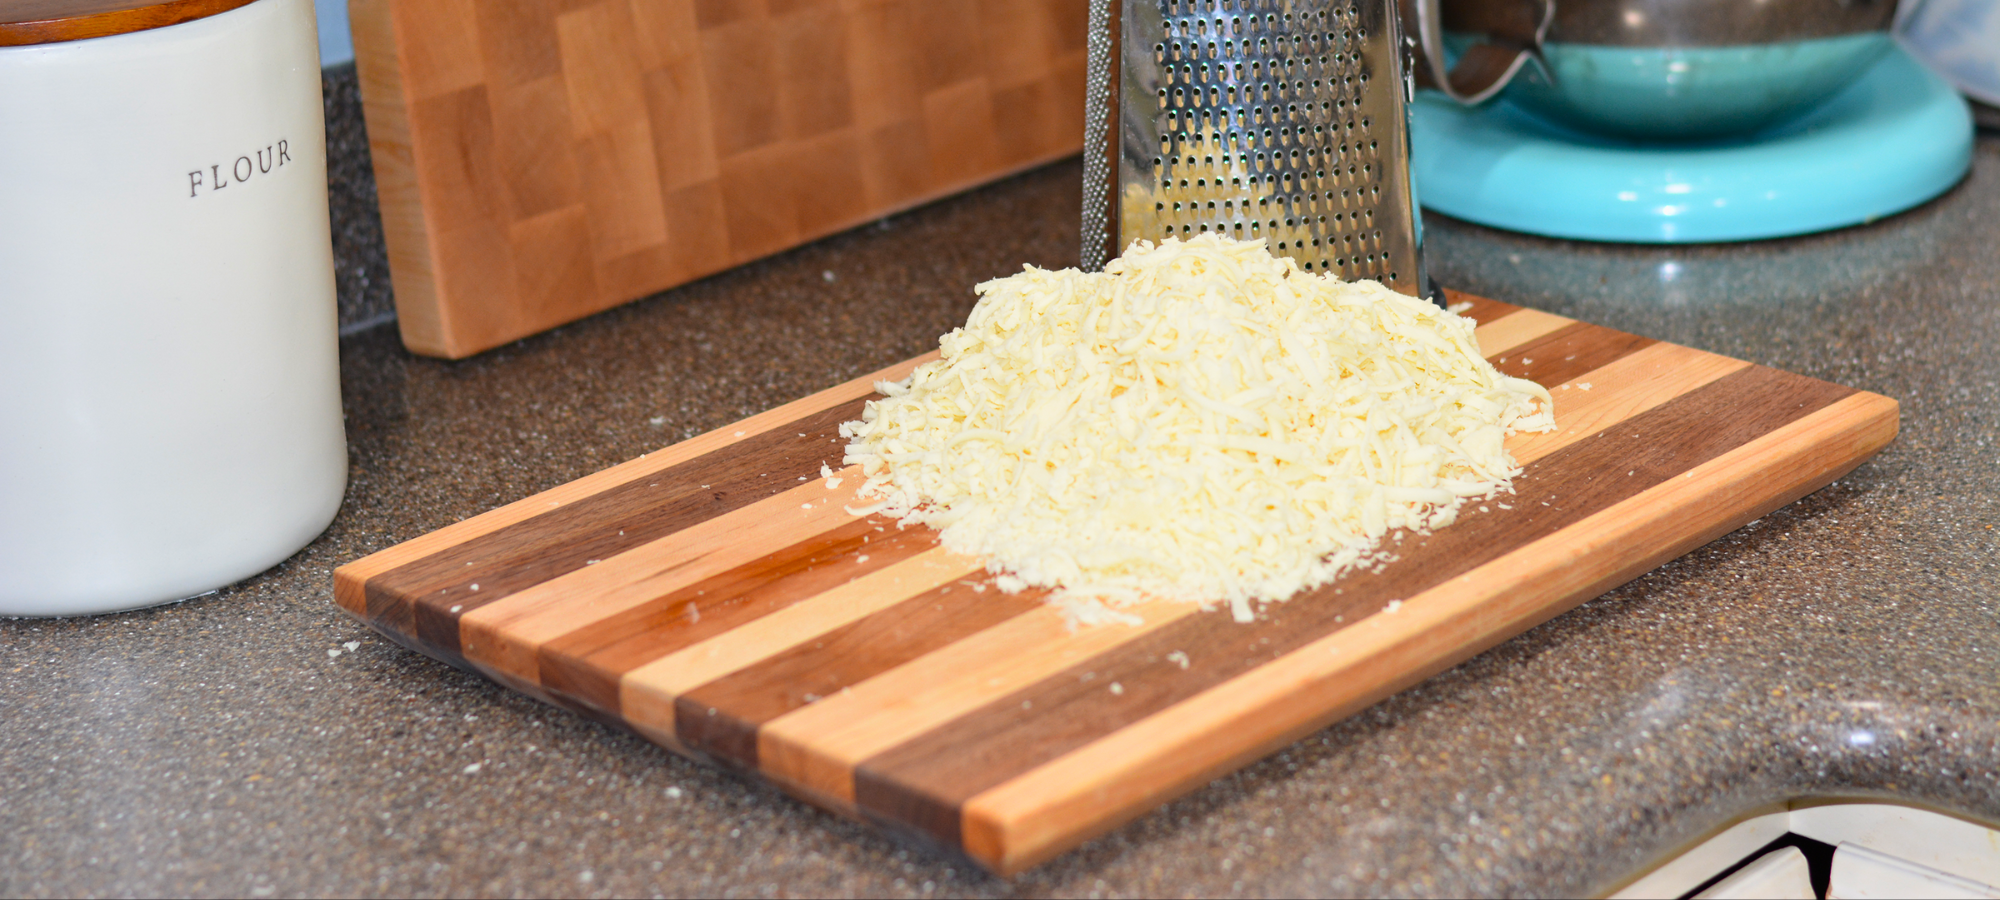 The Advantages of Wood Cutting Boards: Why They're Worth The Higher Cost